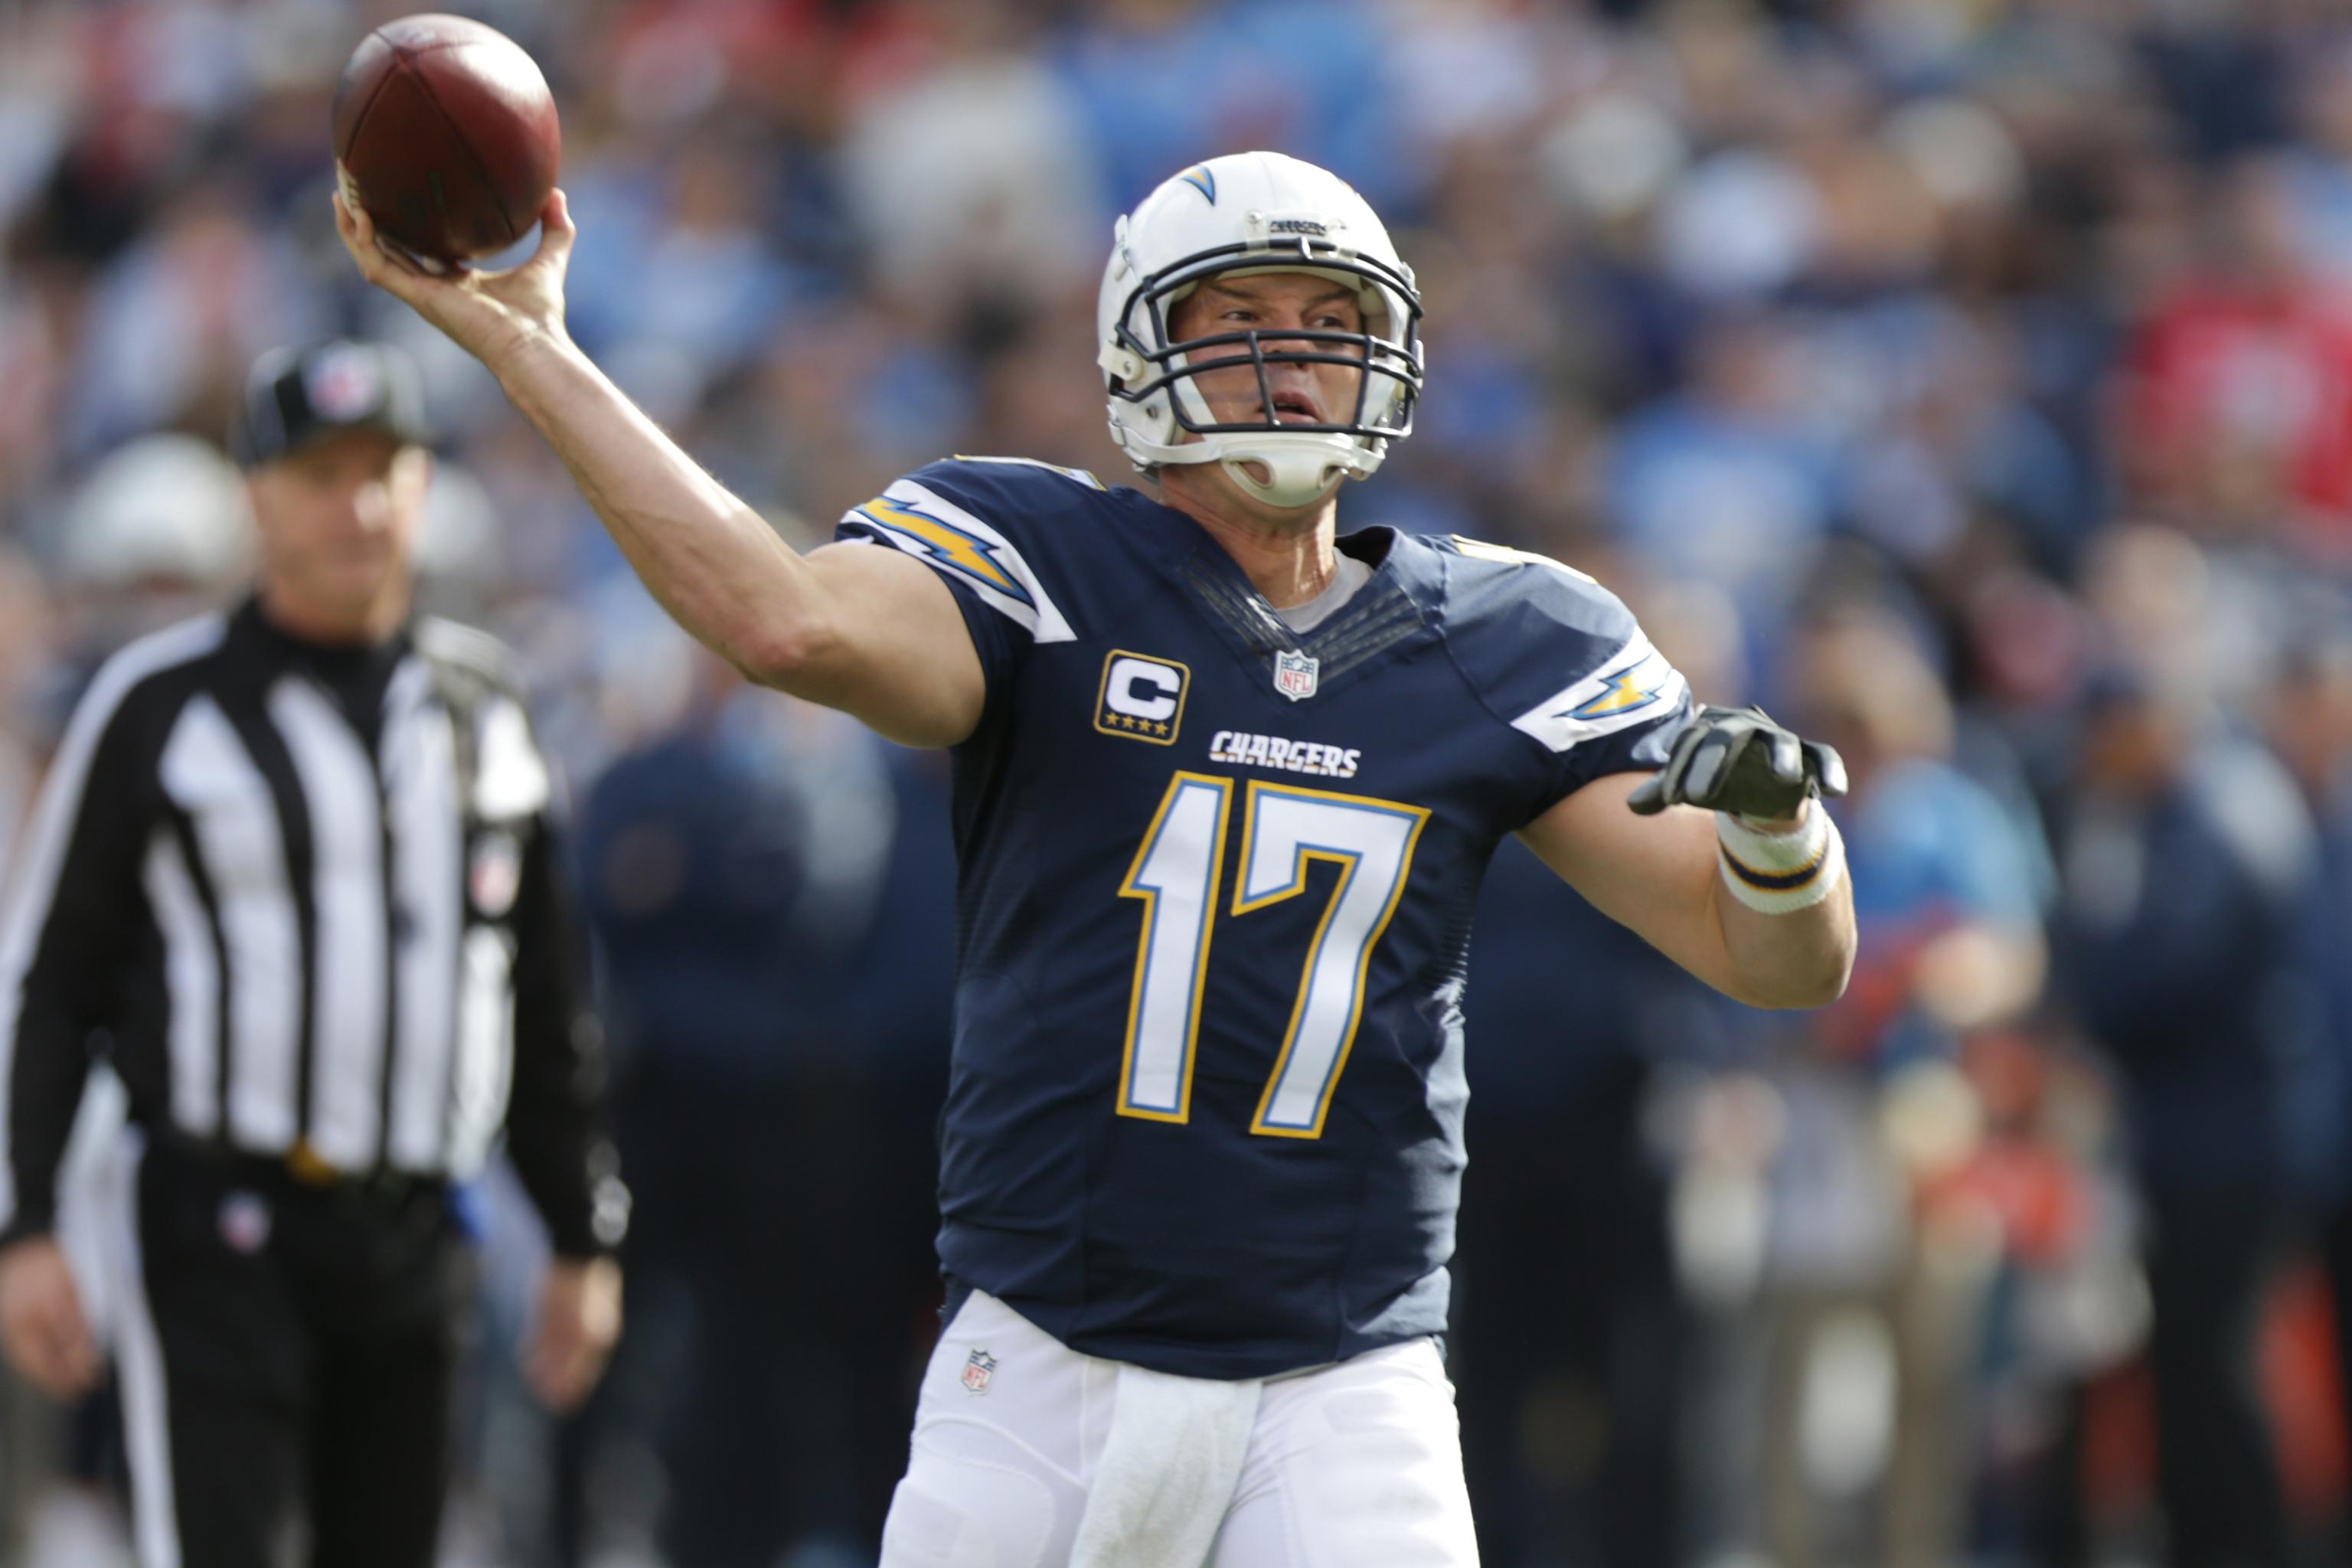 L.A. Chargers Scouting Report: QB Philip Rivers leads way for